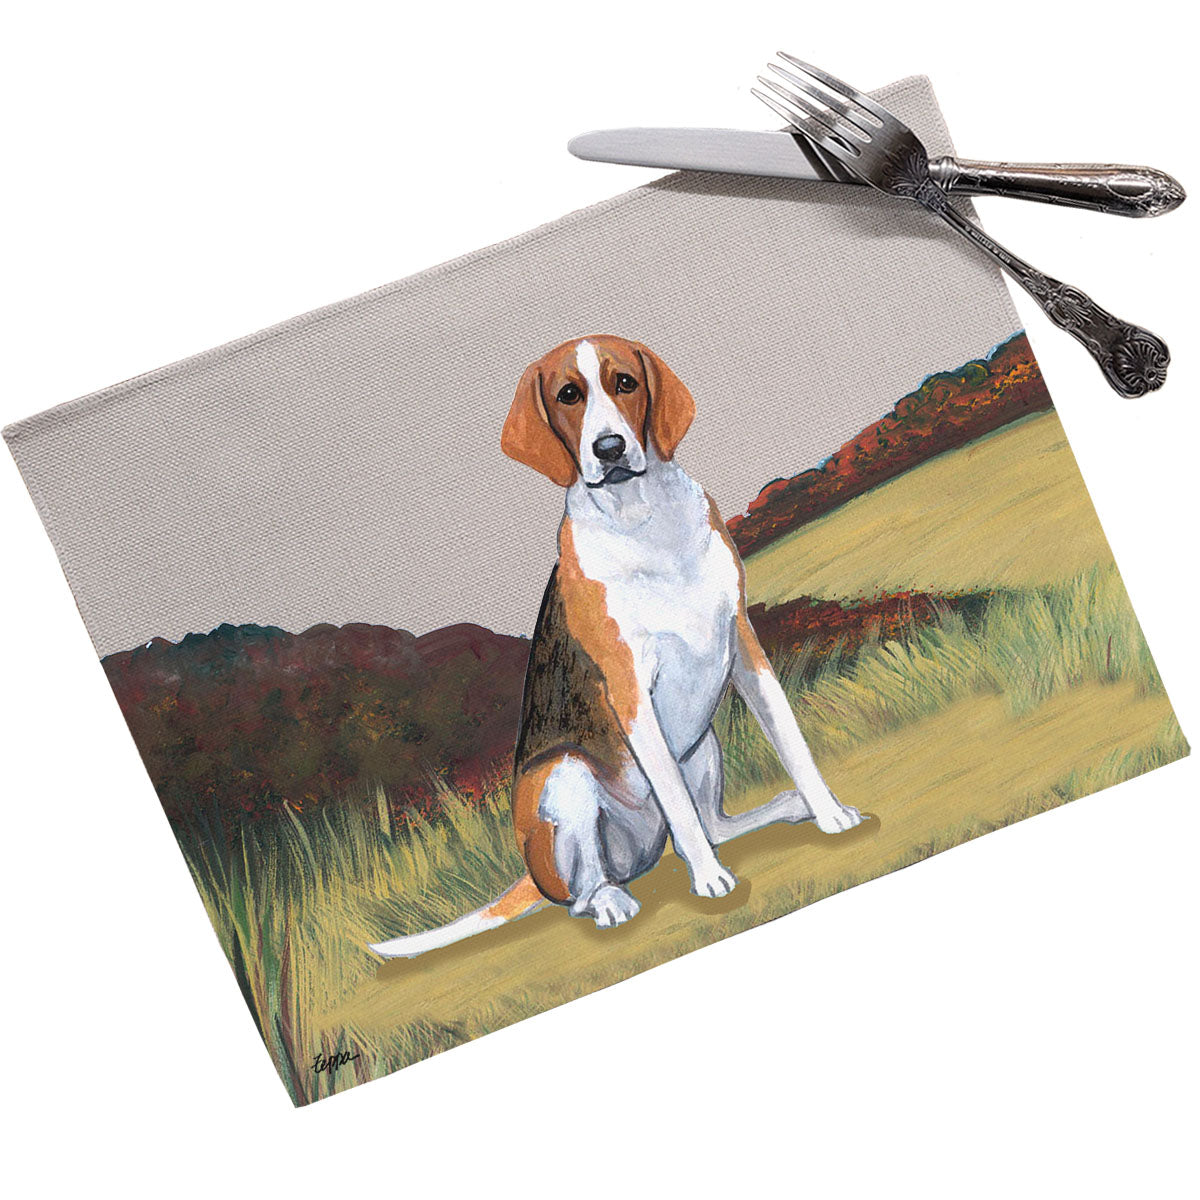 Foxhound Scenic Placemats